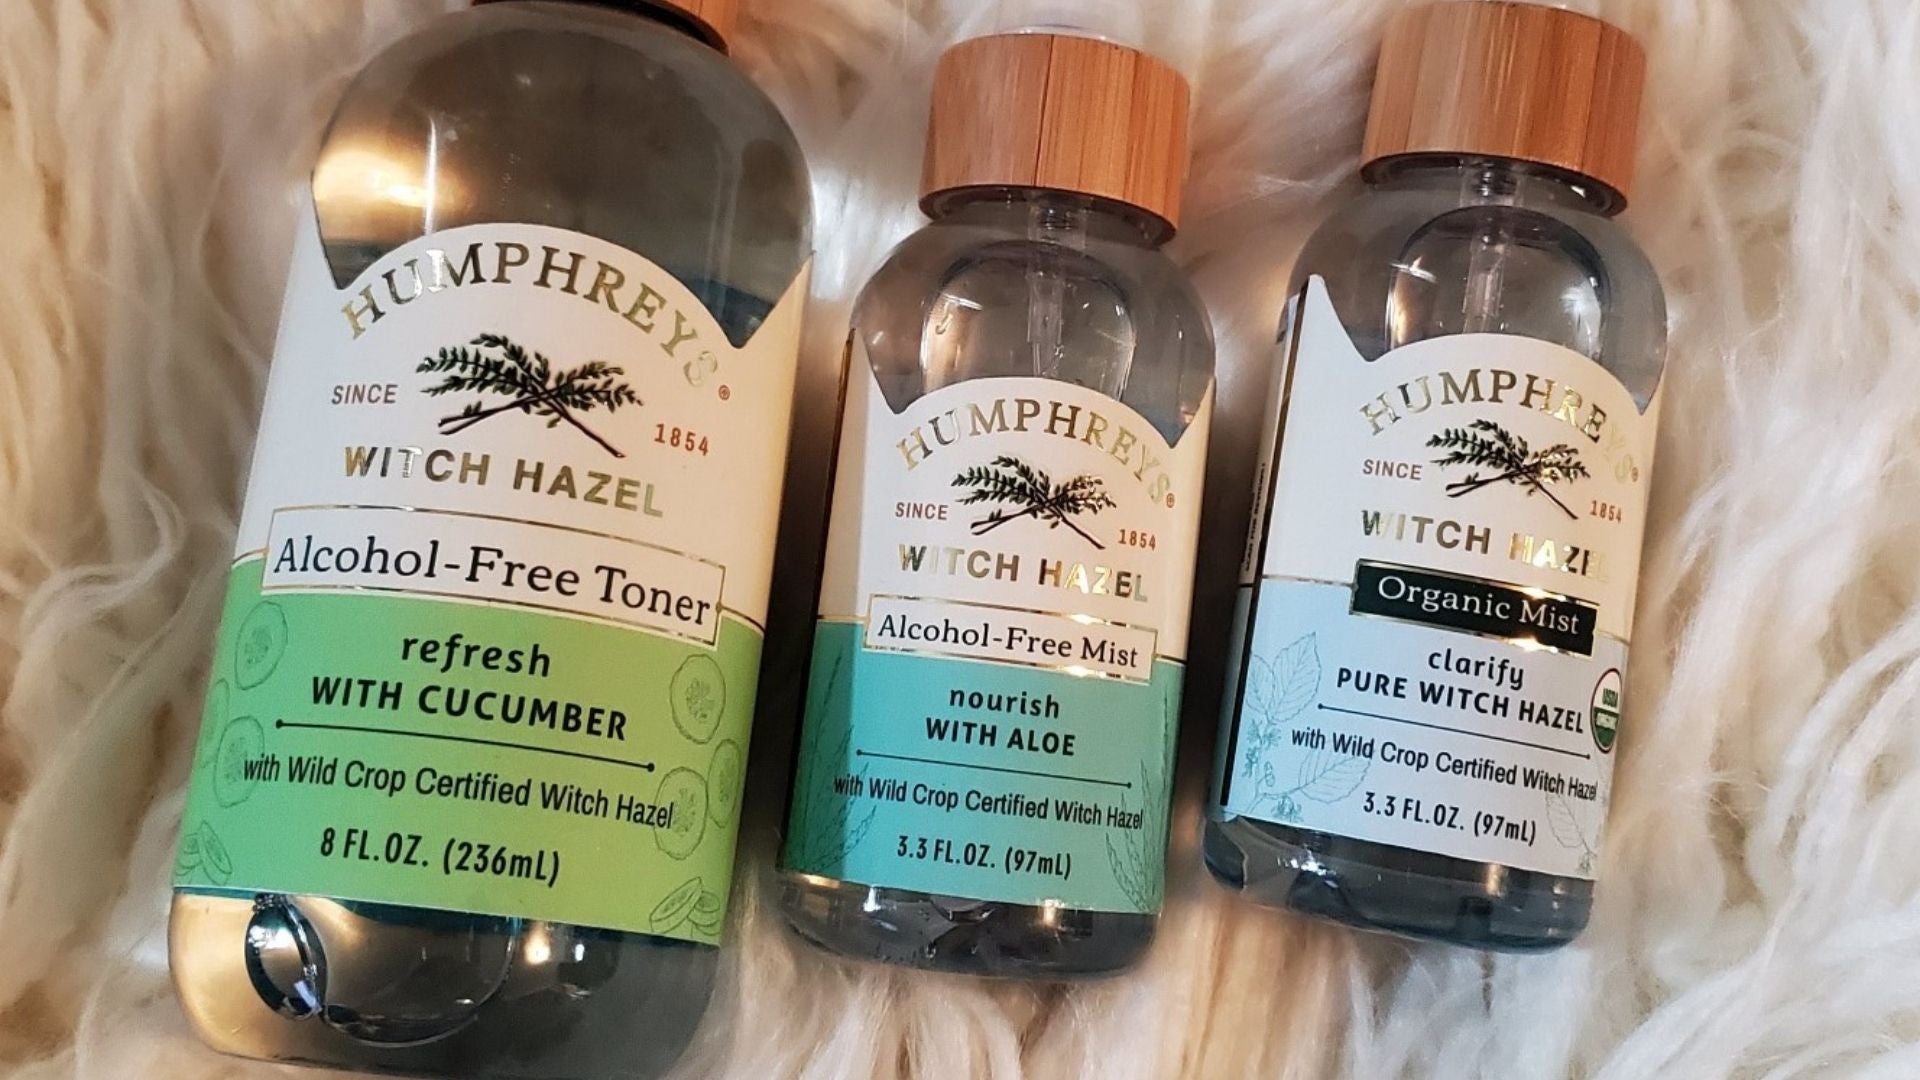 review, skincare, ingredients, trends, 2020, 2021, humphreys, witch hazel, best toners, alcohol free toners, cucumber, aloe, drugstore skincare